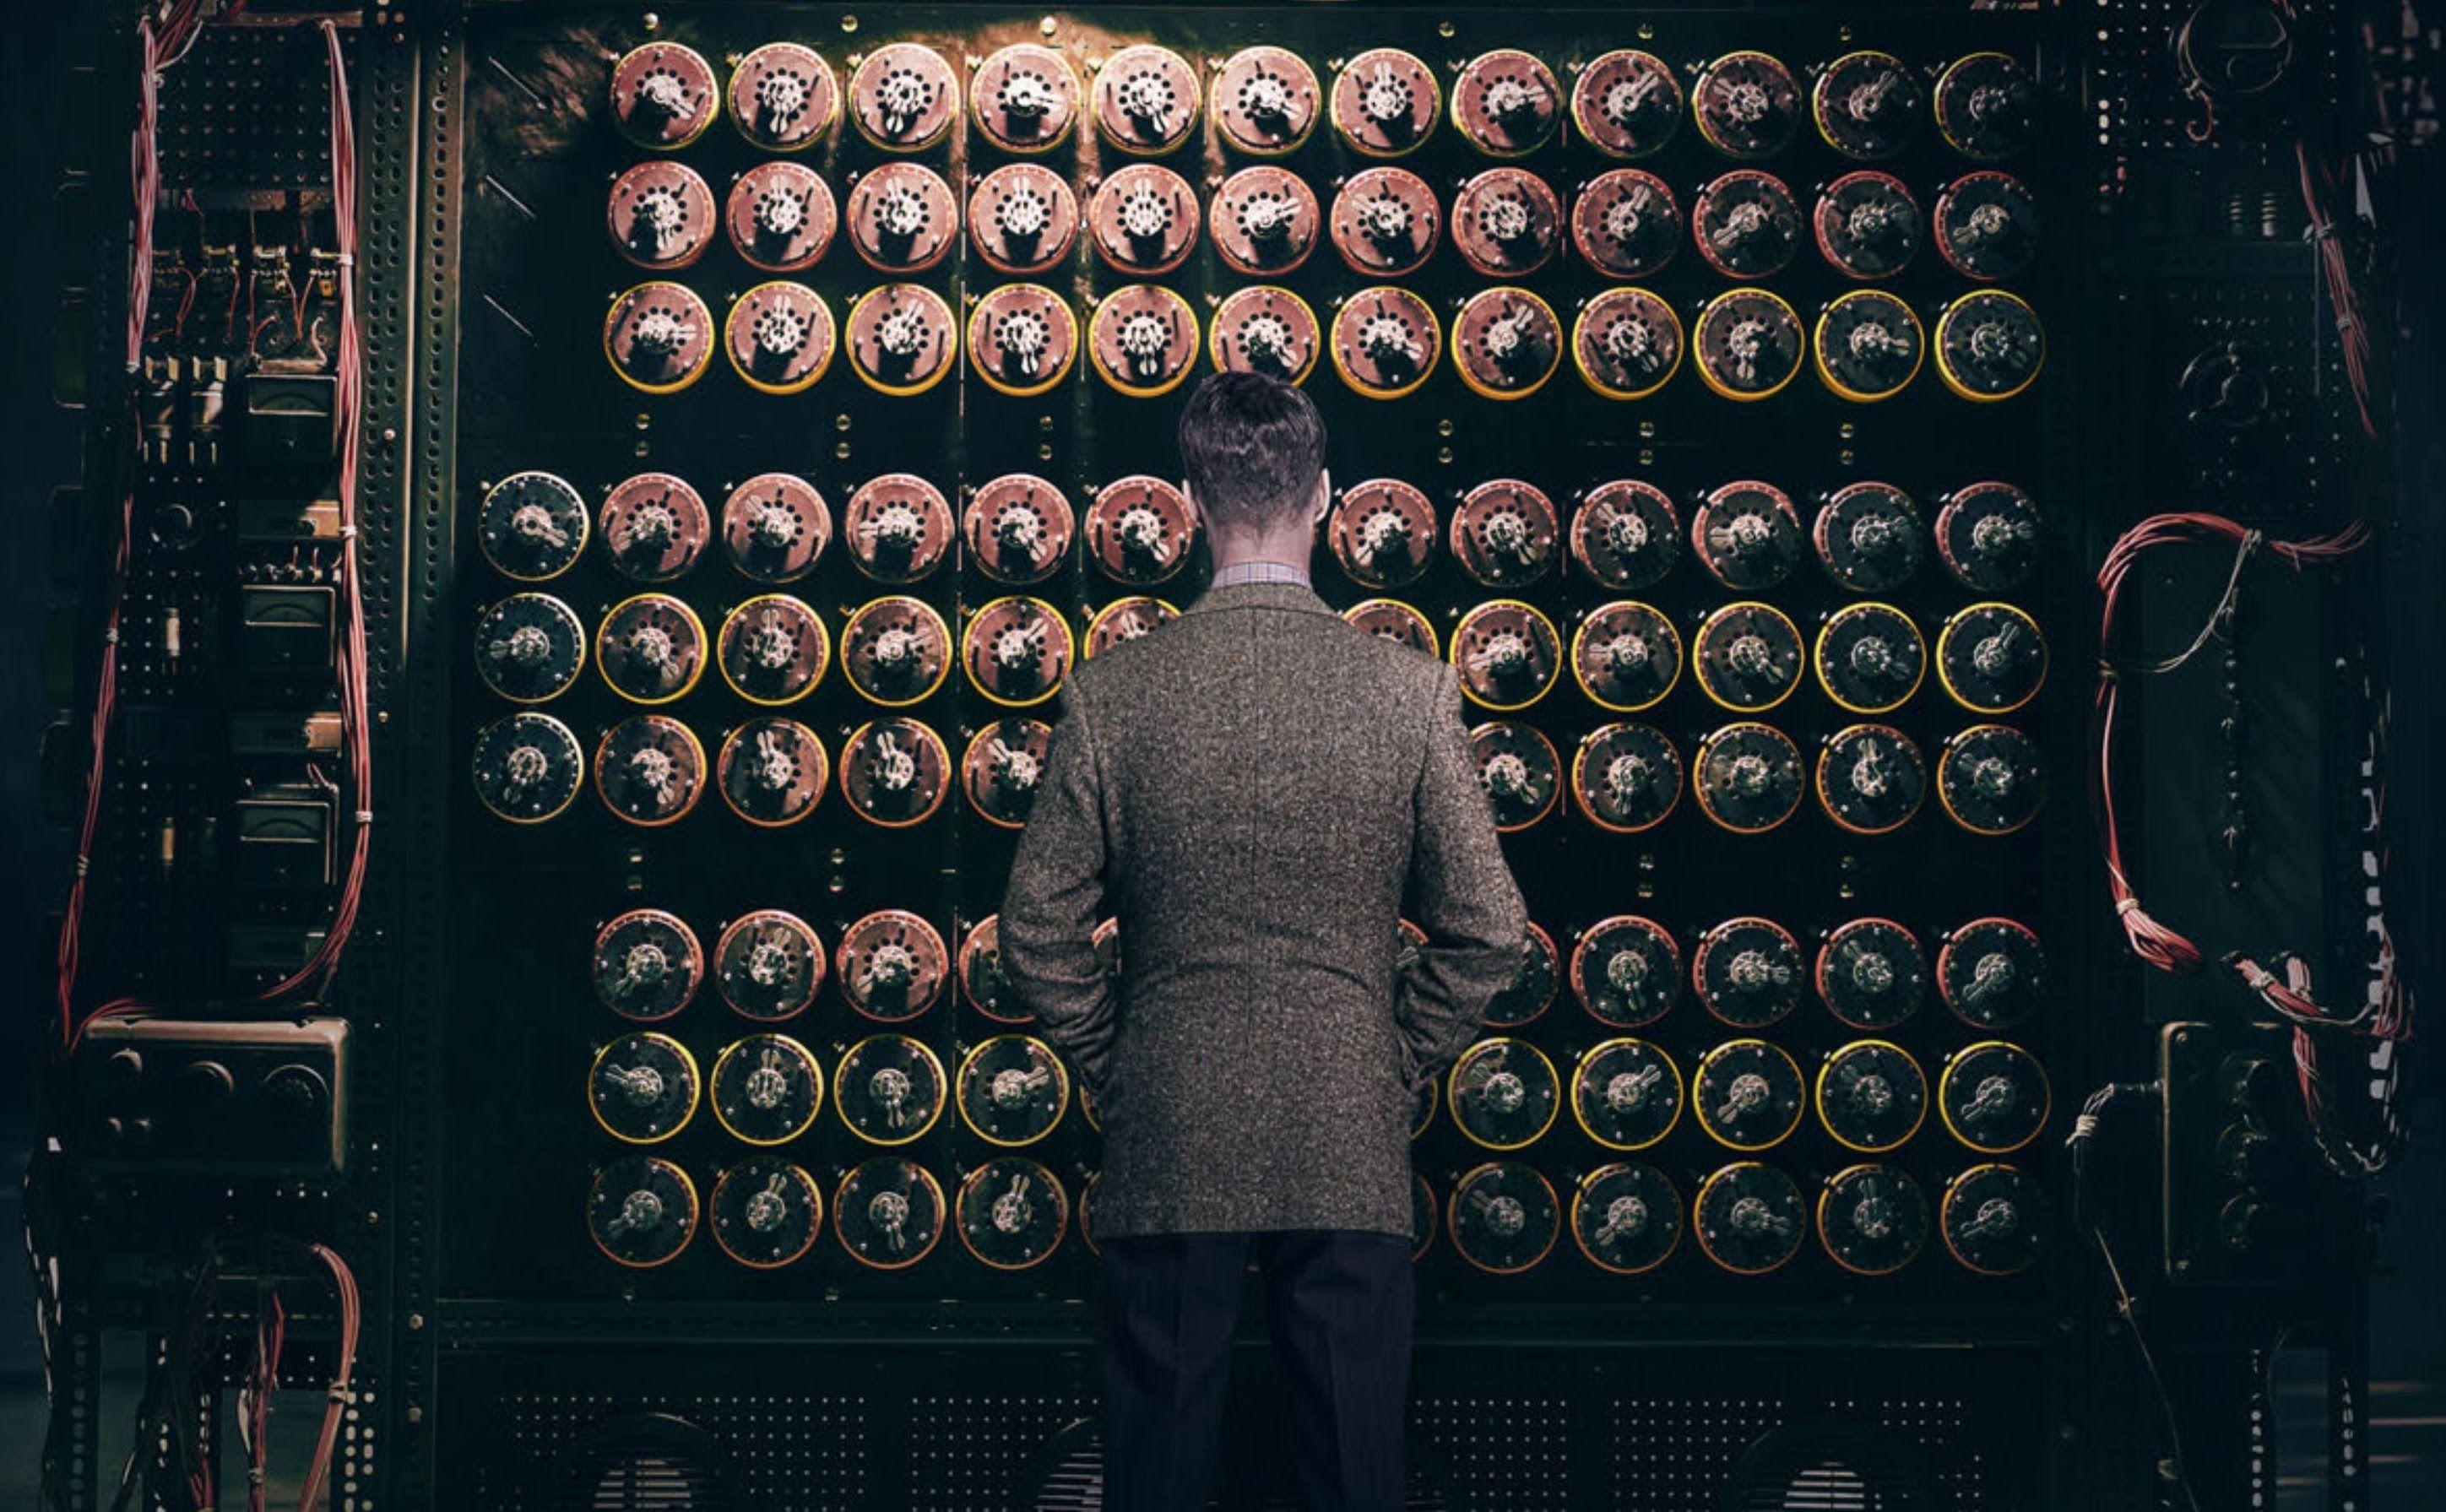 HD the imitation game wallpapers For Windows Wallpapers Full HD with